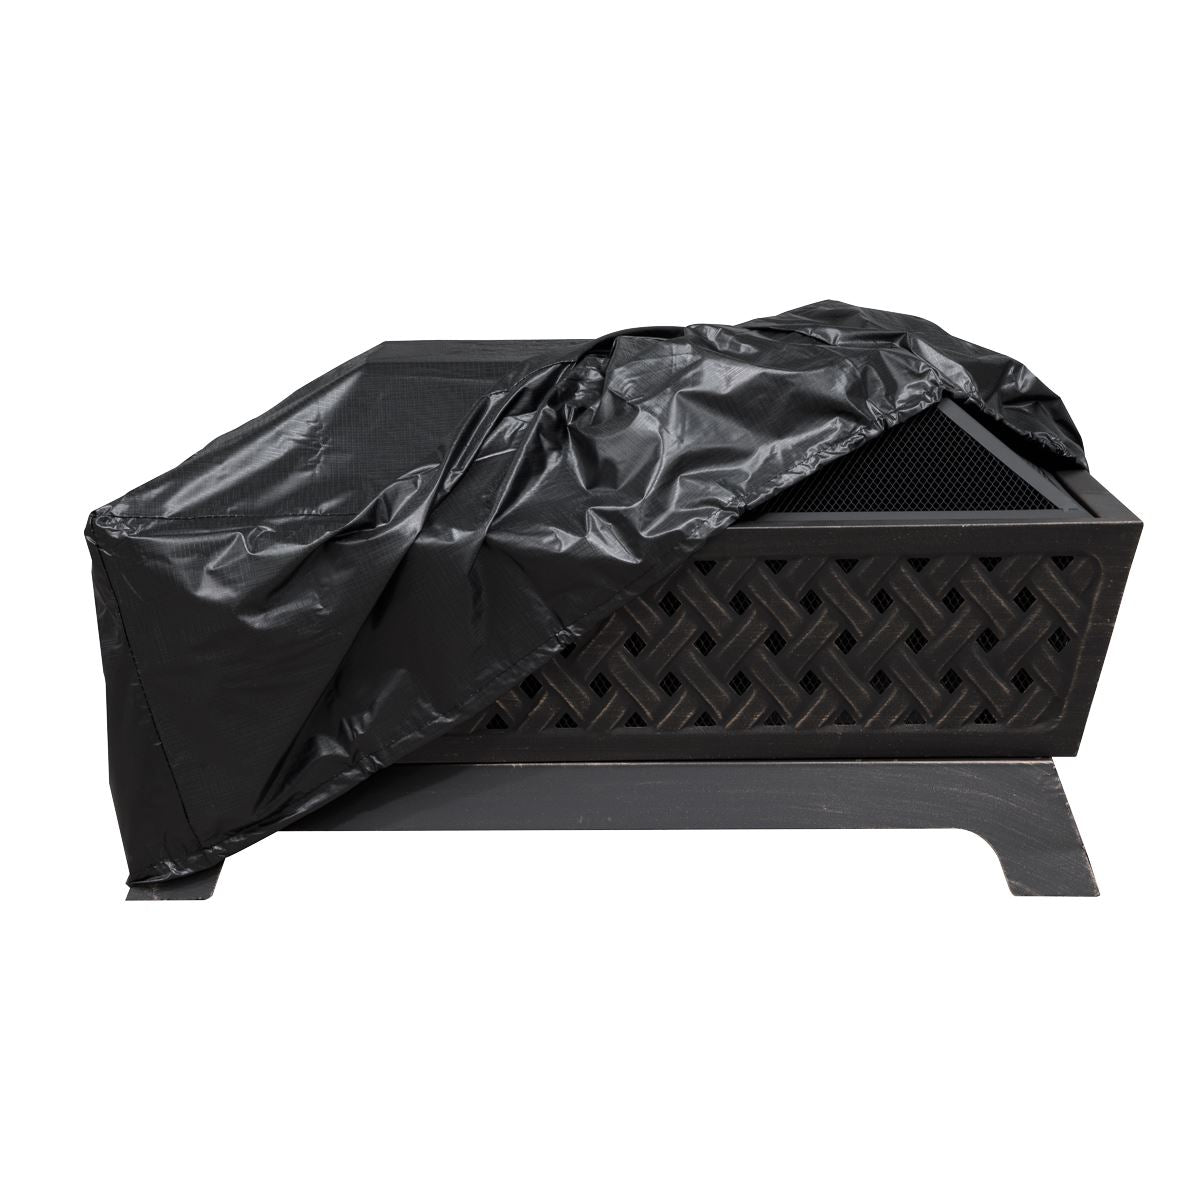 Dellonda Fire Pit, Fireplace, Outdoor Patio Heater PVC Cover, Water-Resistant, Heavy-Duty